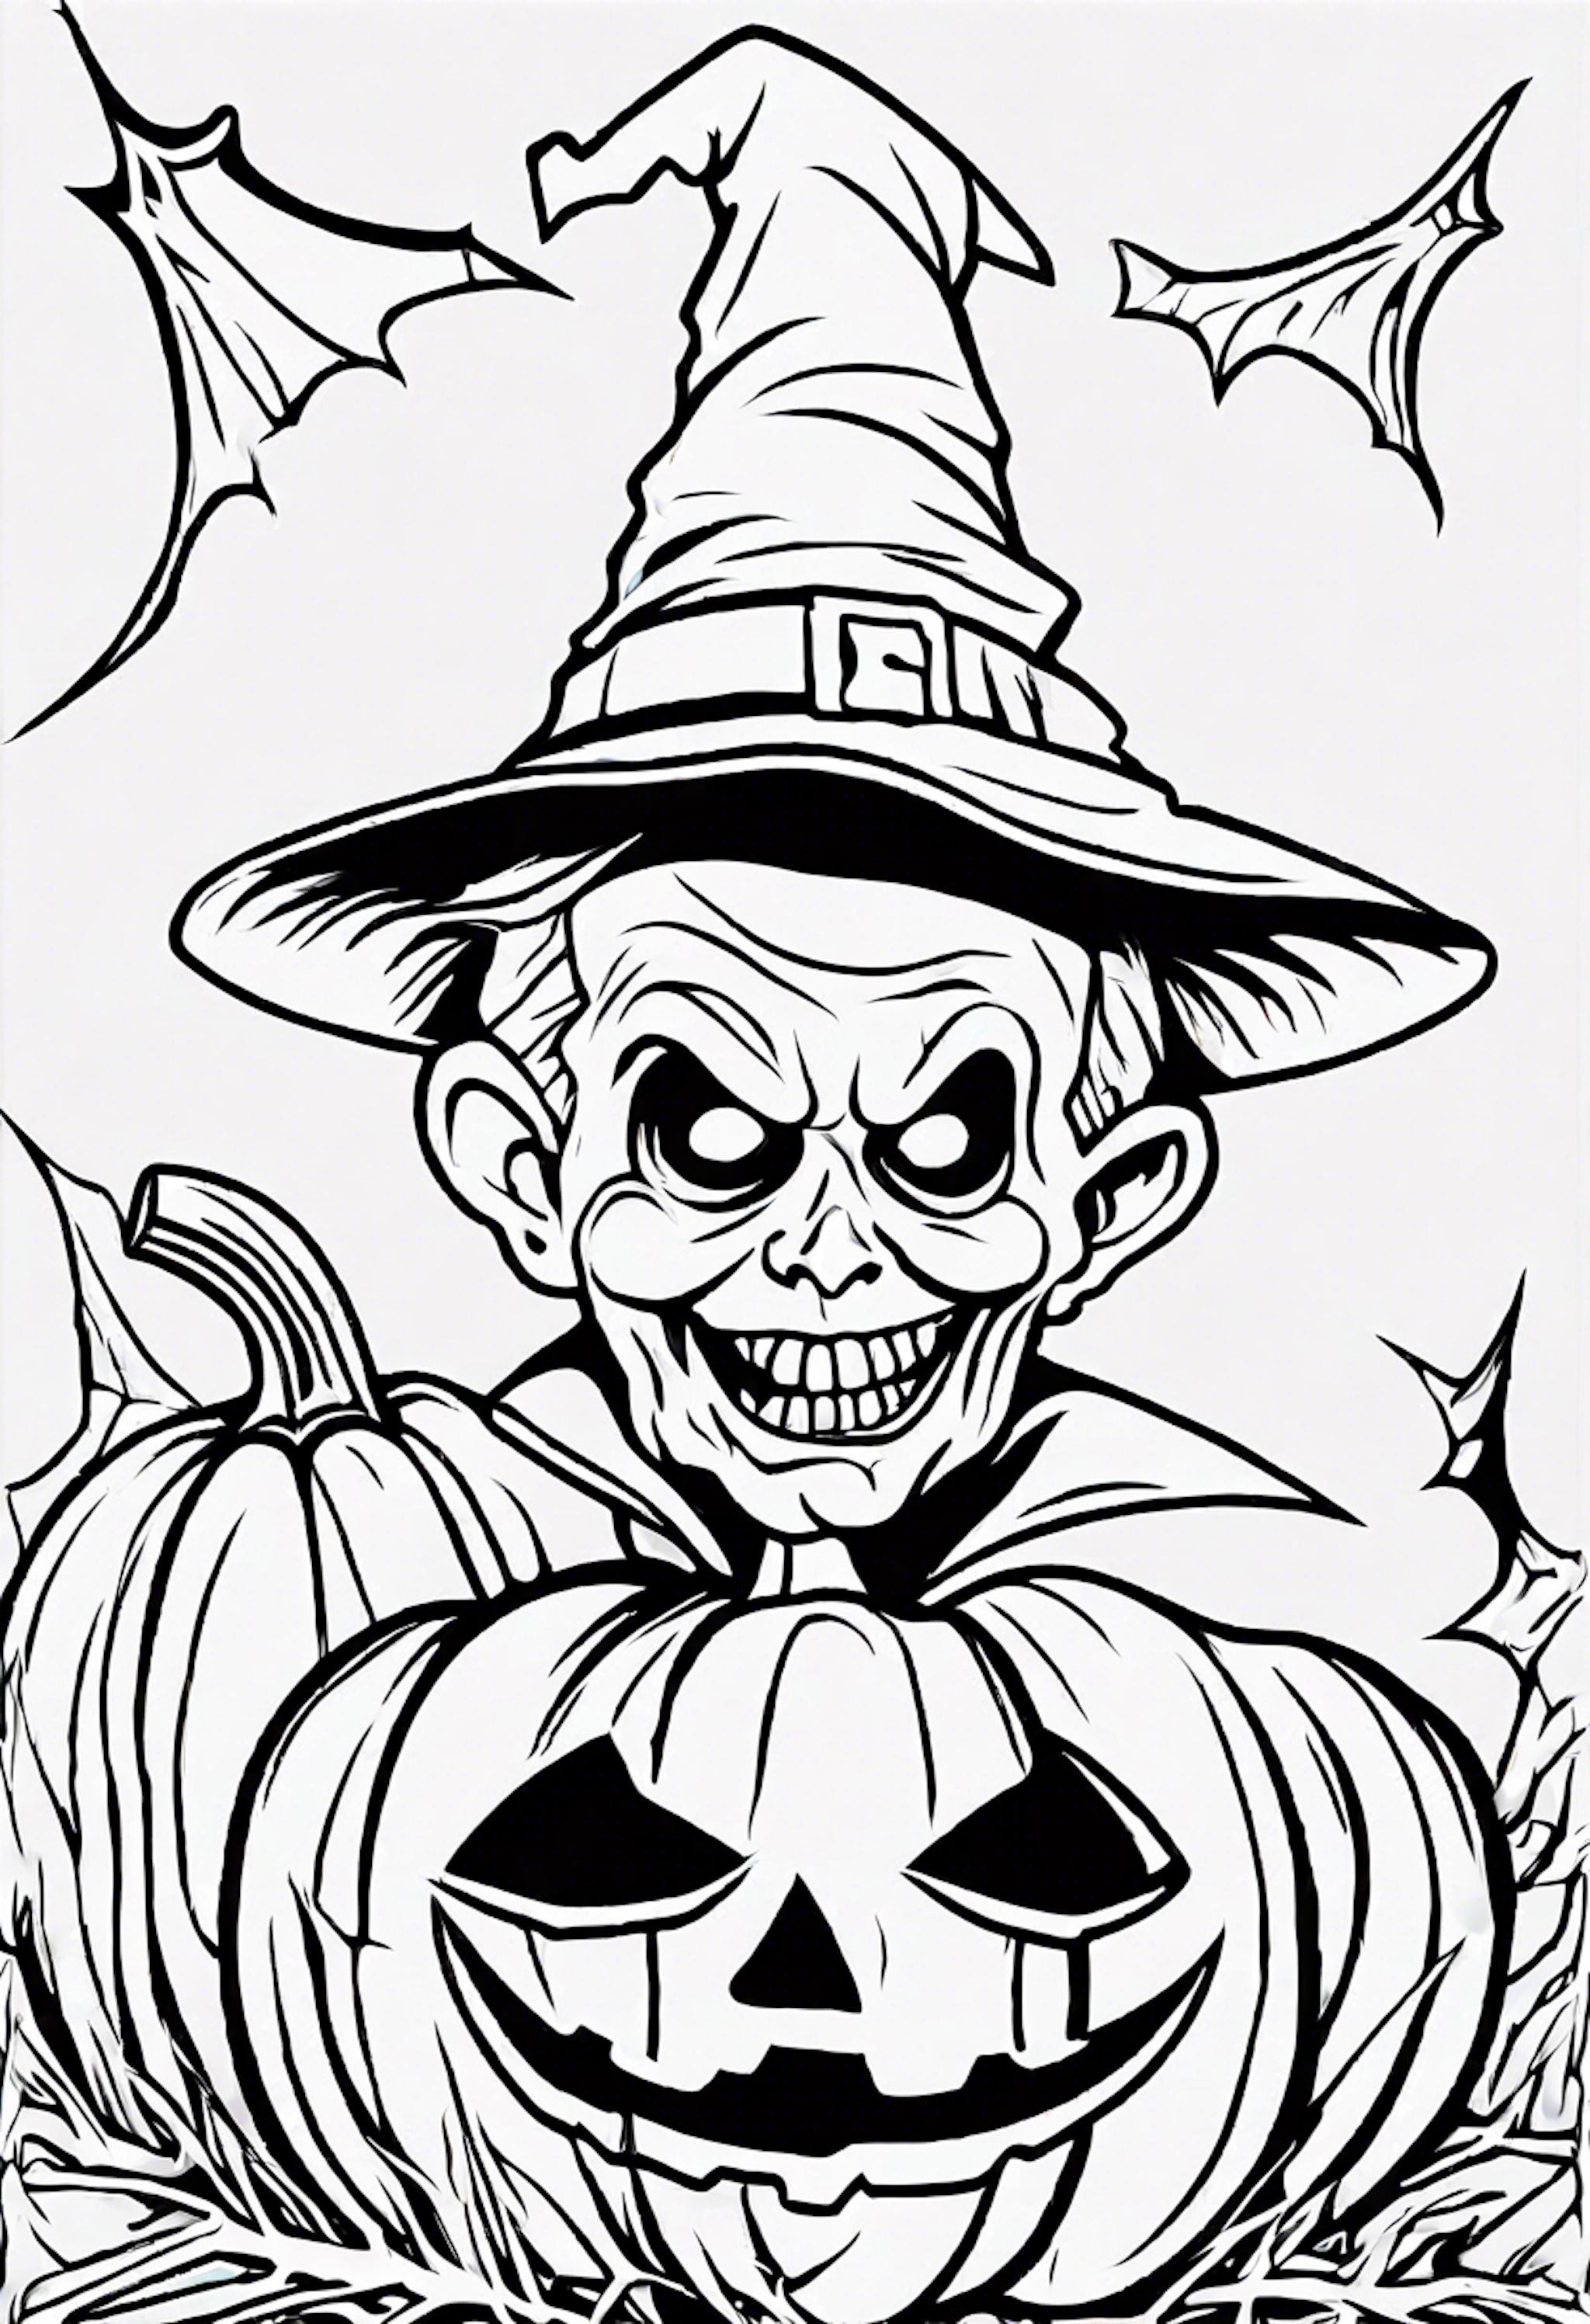 A coloring page for 1 Halloween coloring pages